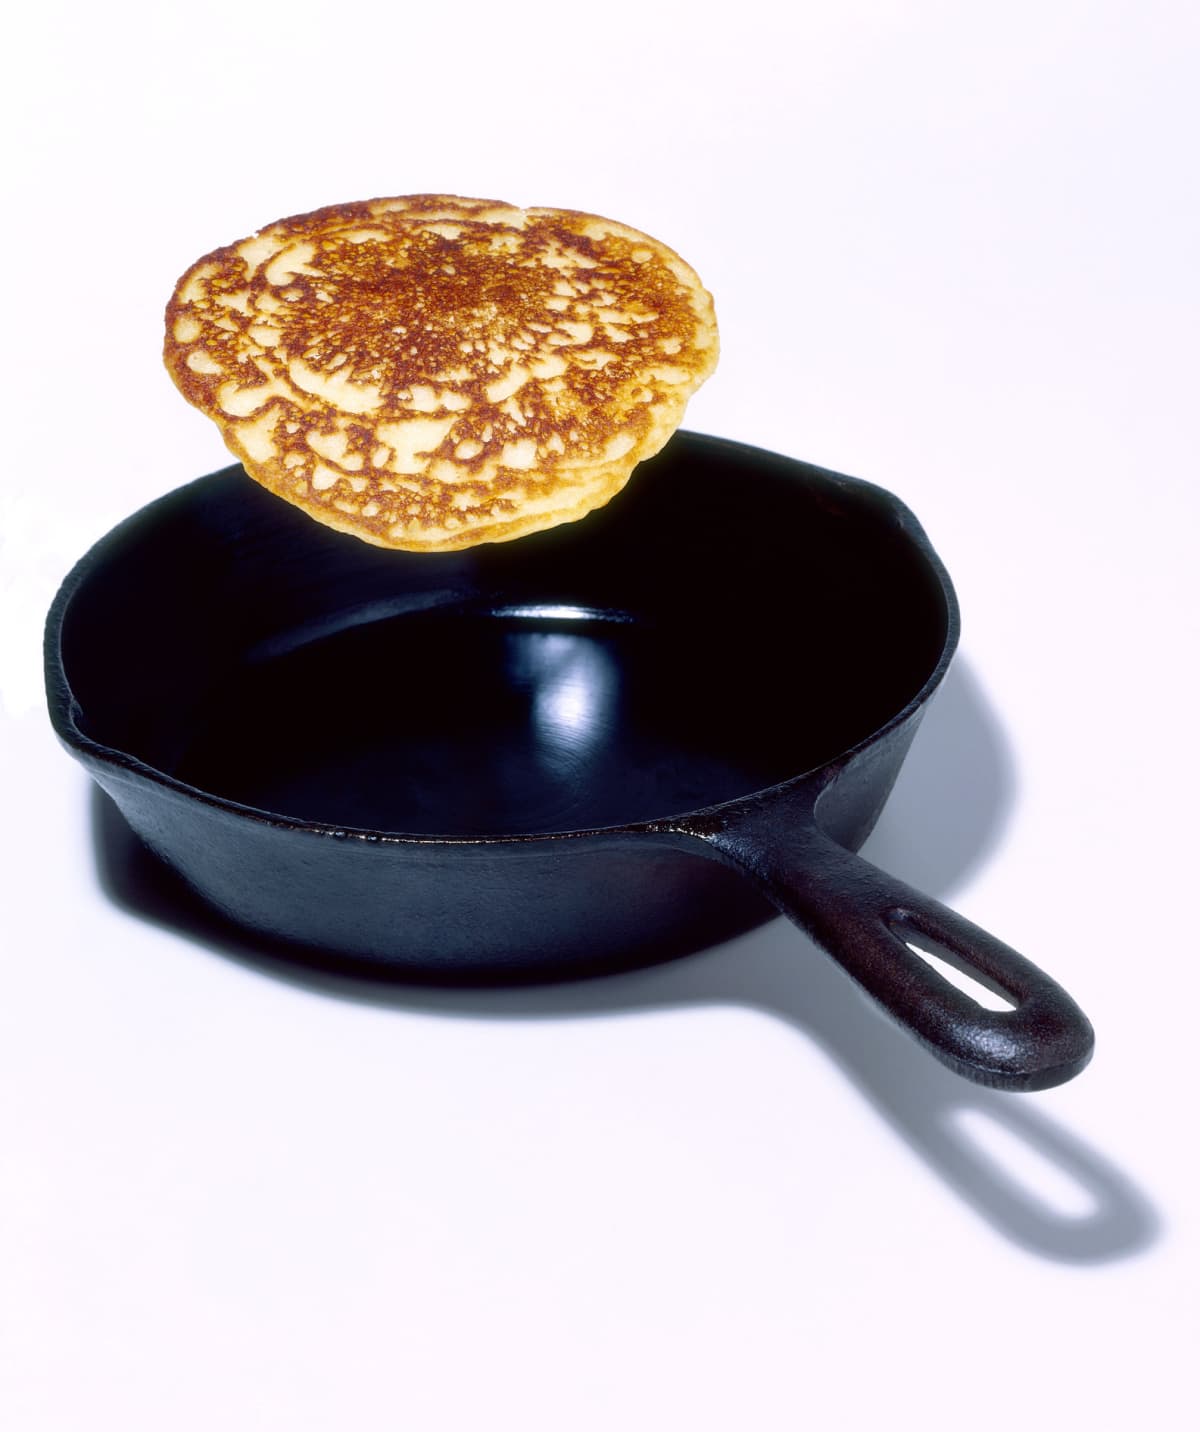 Smoking cast iron griddle pan on a dark wooden table, Newport, Wales, 2010